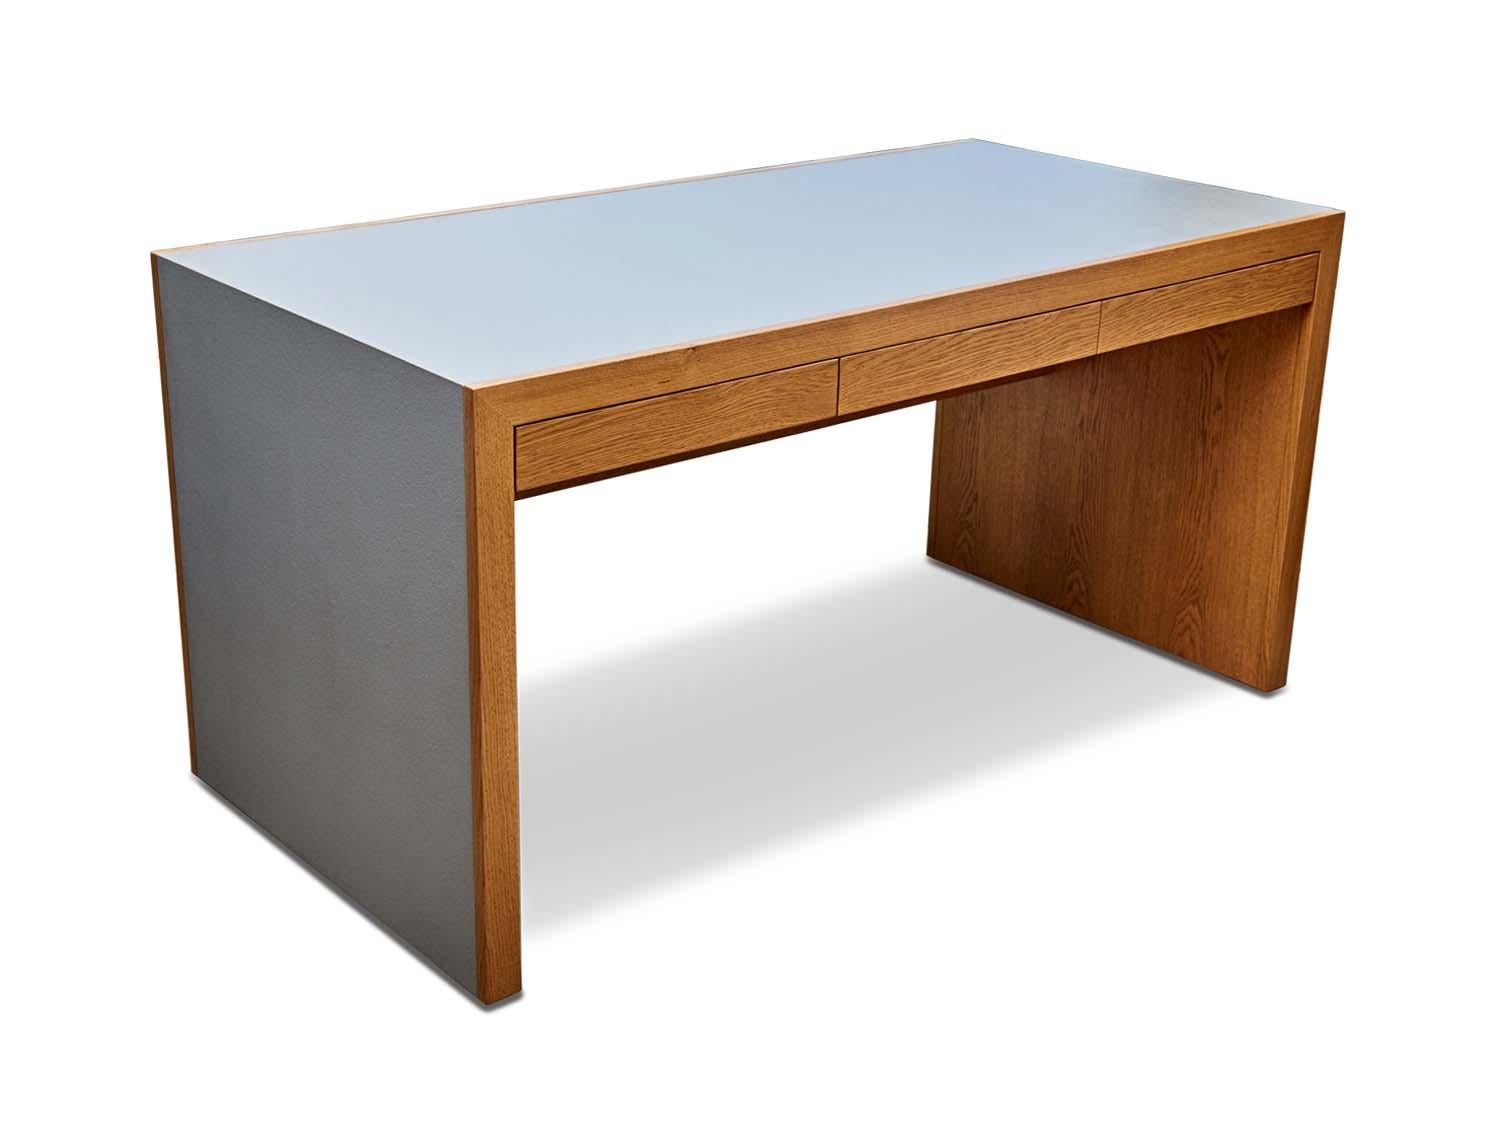 The Parkman desk features a Parsons-style waterfall shape with cork on the top and sides and three drawers. Available in American walnut or white oak and 5 different cork colors.

The Lawson-Fenning Collection is designed and handmade in Los